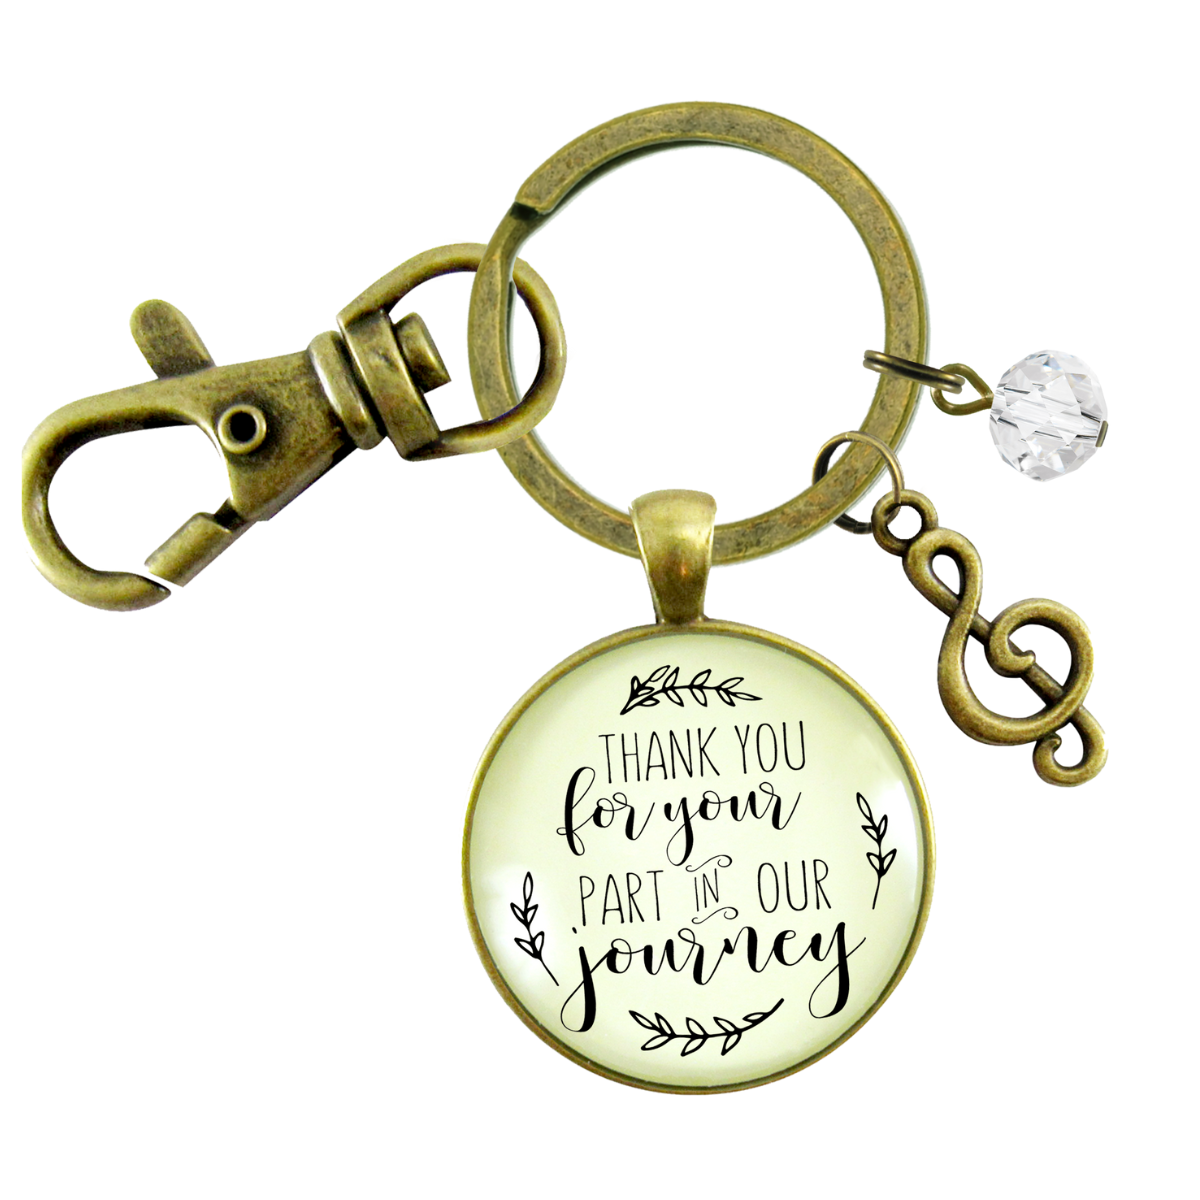 Wedding Singer Gift Keychain Thank You For Your Part Rustic For Musician Soloist G Clef  Keychain - Women - Gutsy Goodness Handmade Jewelry